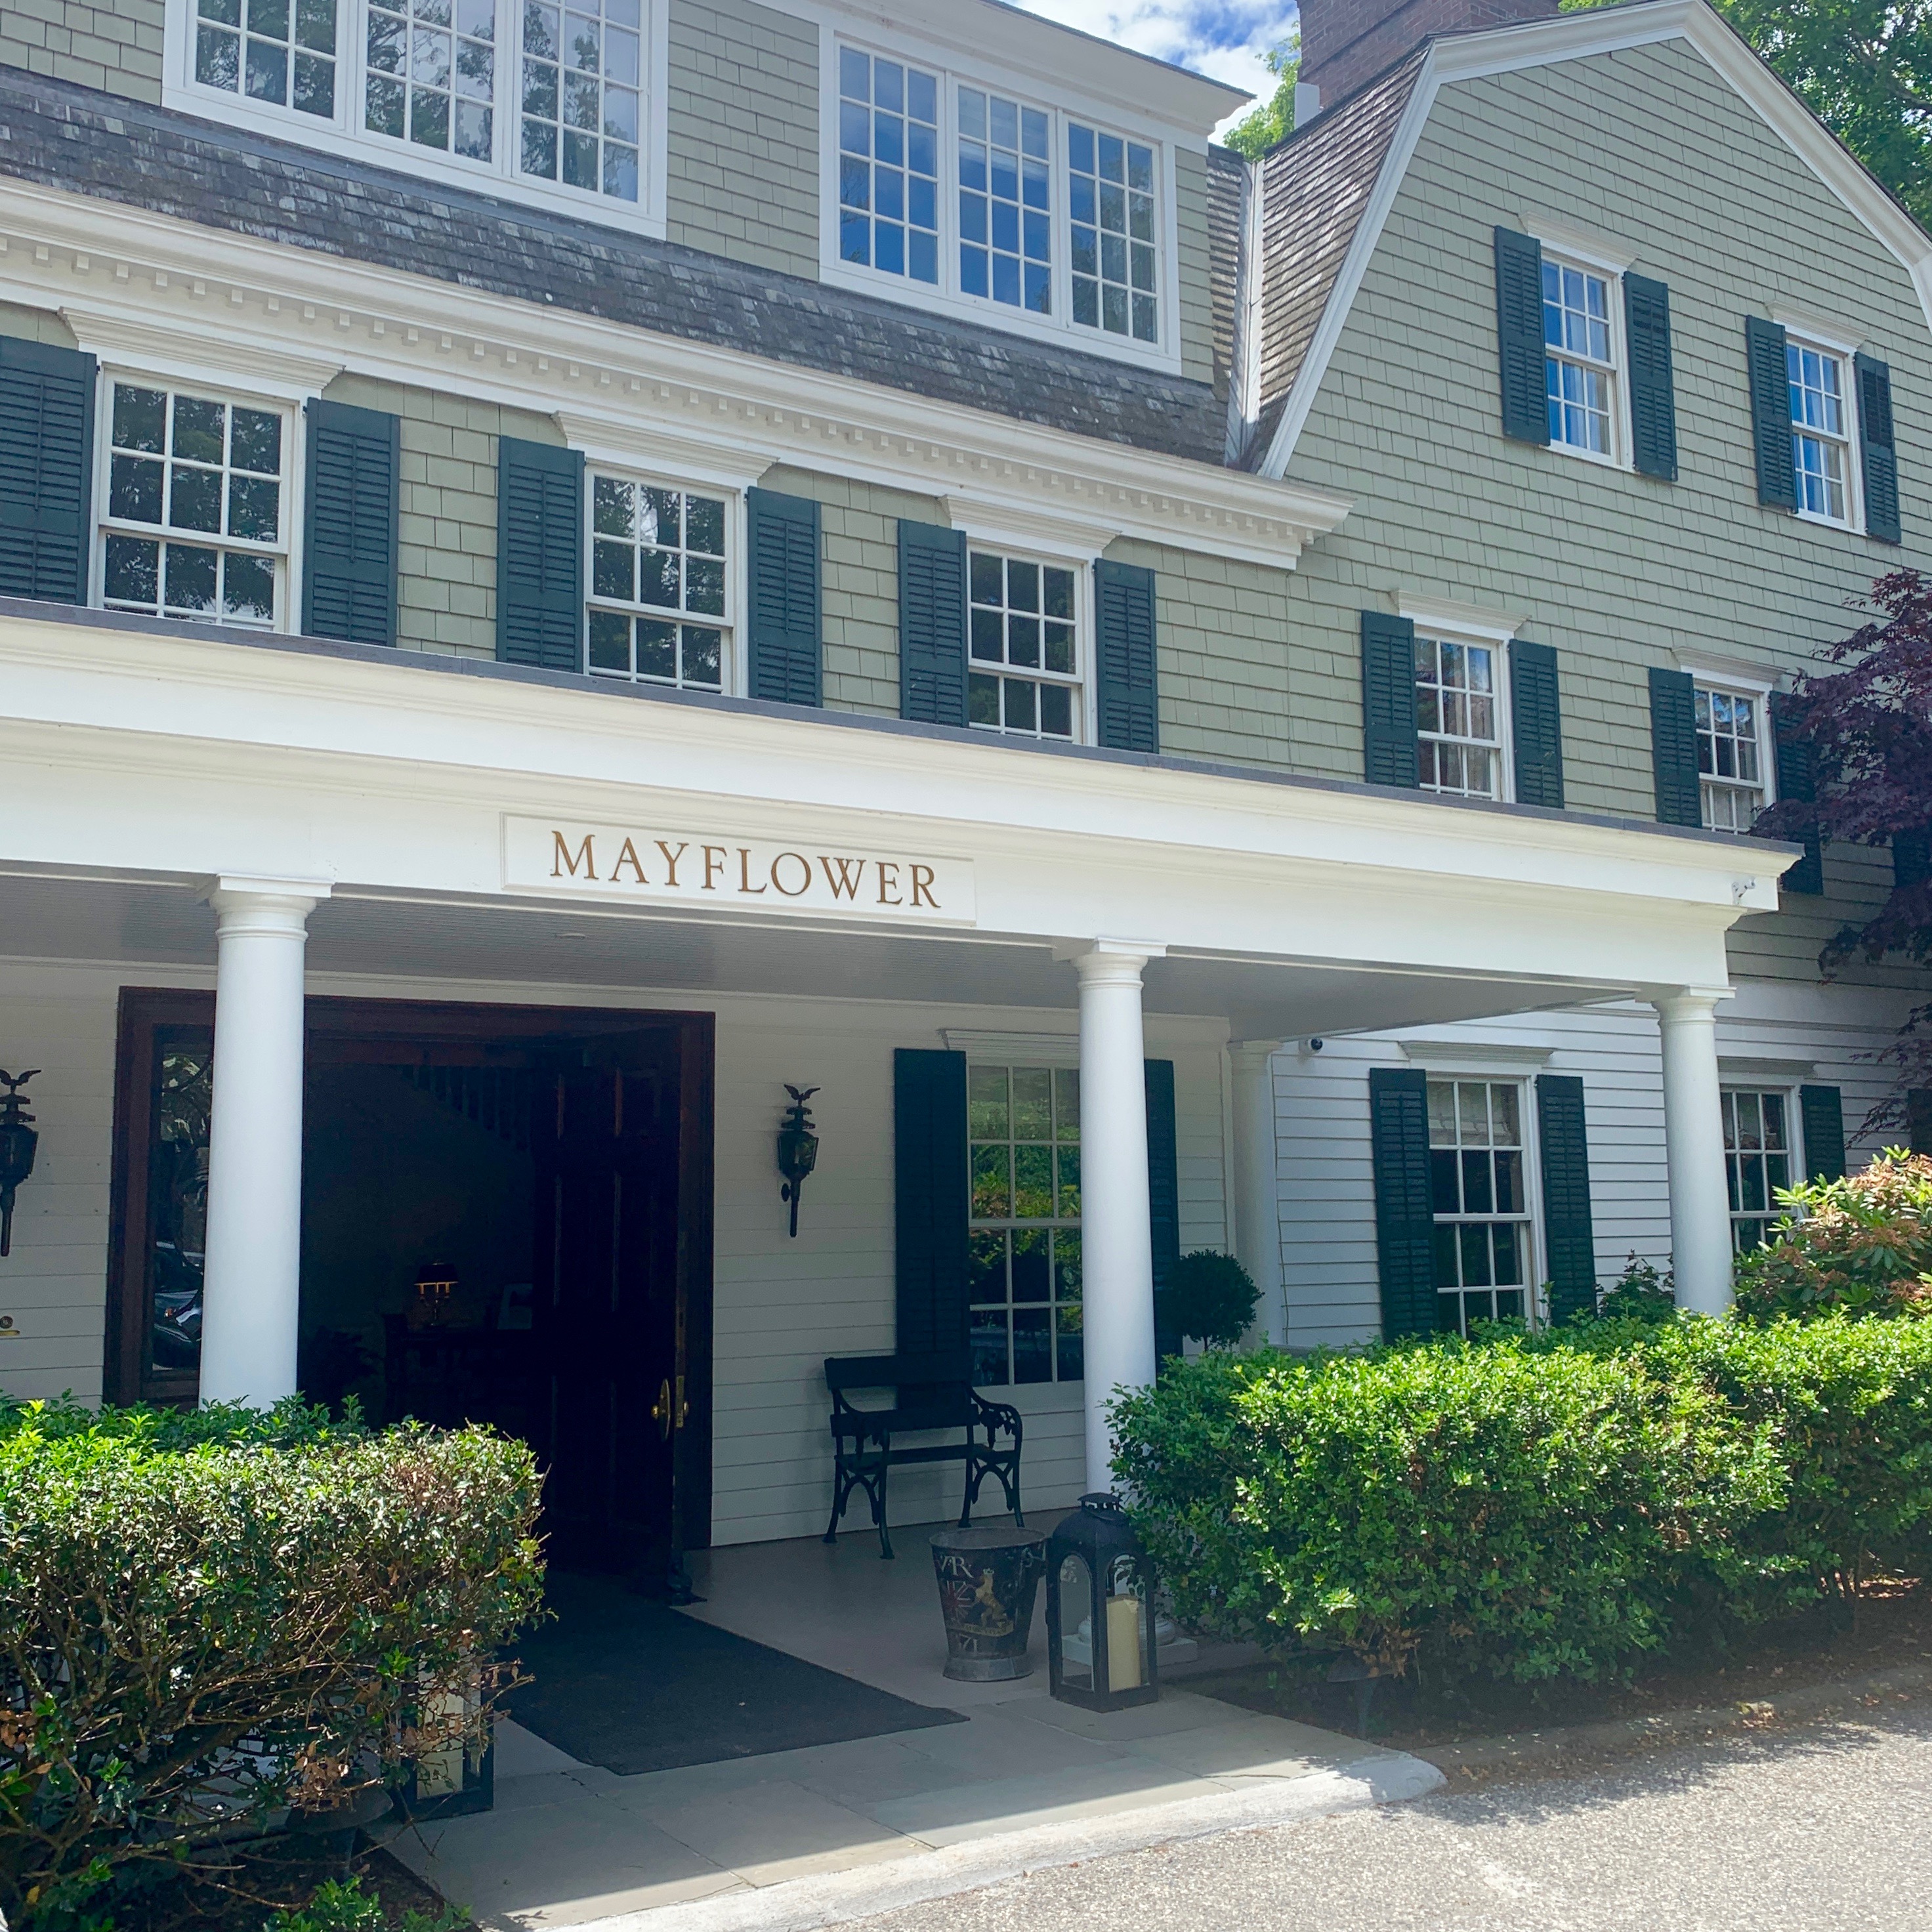 The Mayflower Inn & Spa Photo by The Potted Boxwood 22